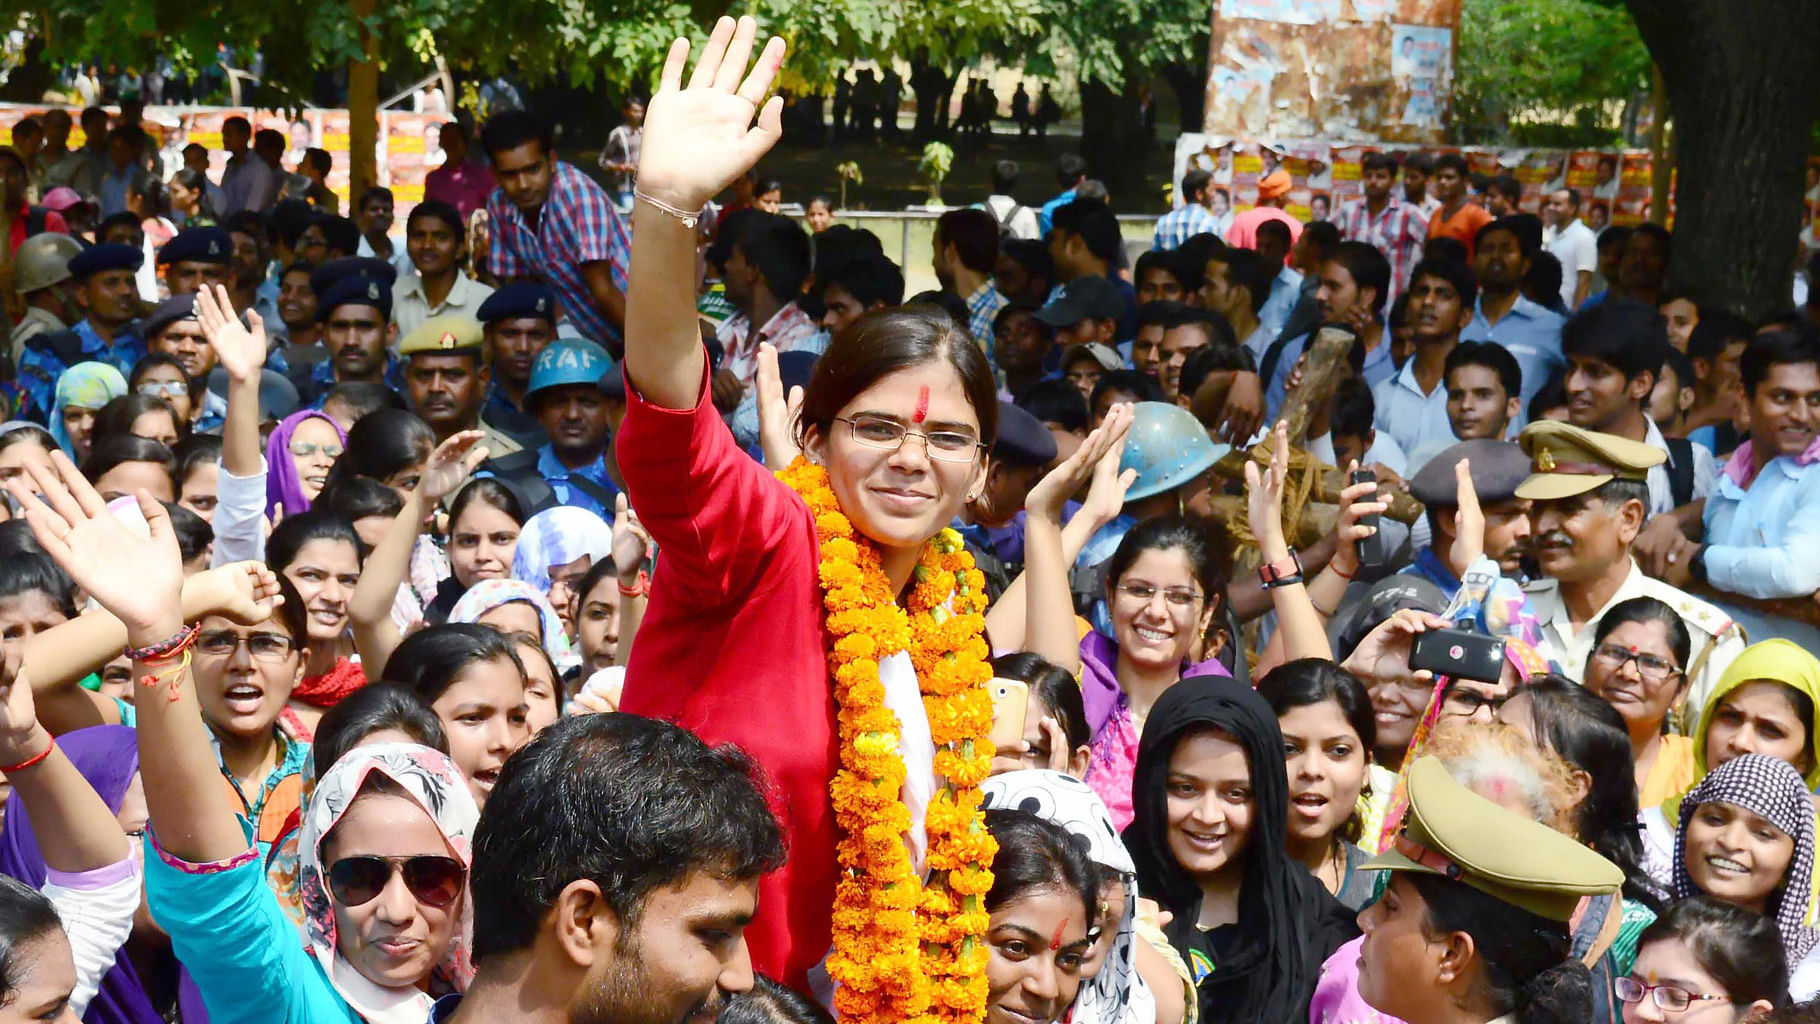 Richa Singh, who was elected the president of Allahabad University Student’s Union celebrates her victory at the university campus on 1 October 2015. (Photo: IANS)